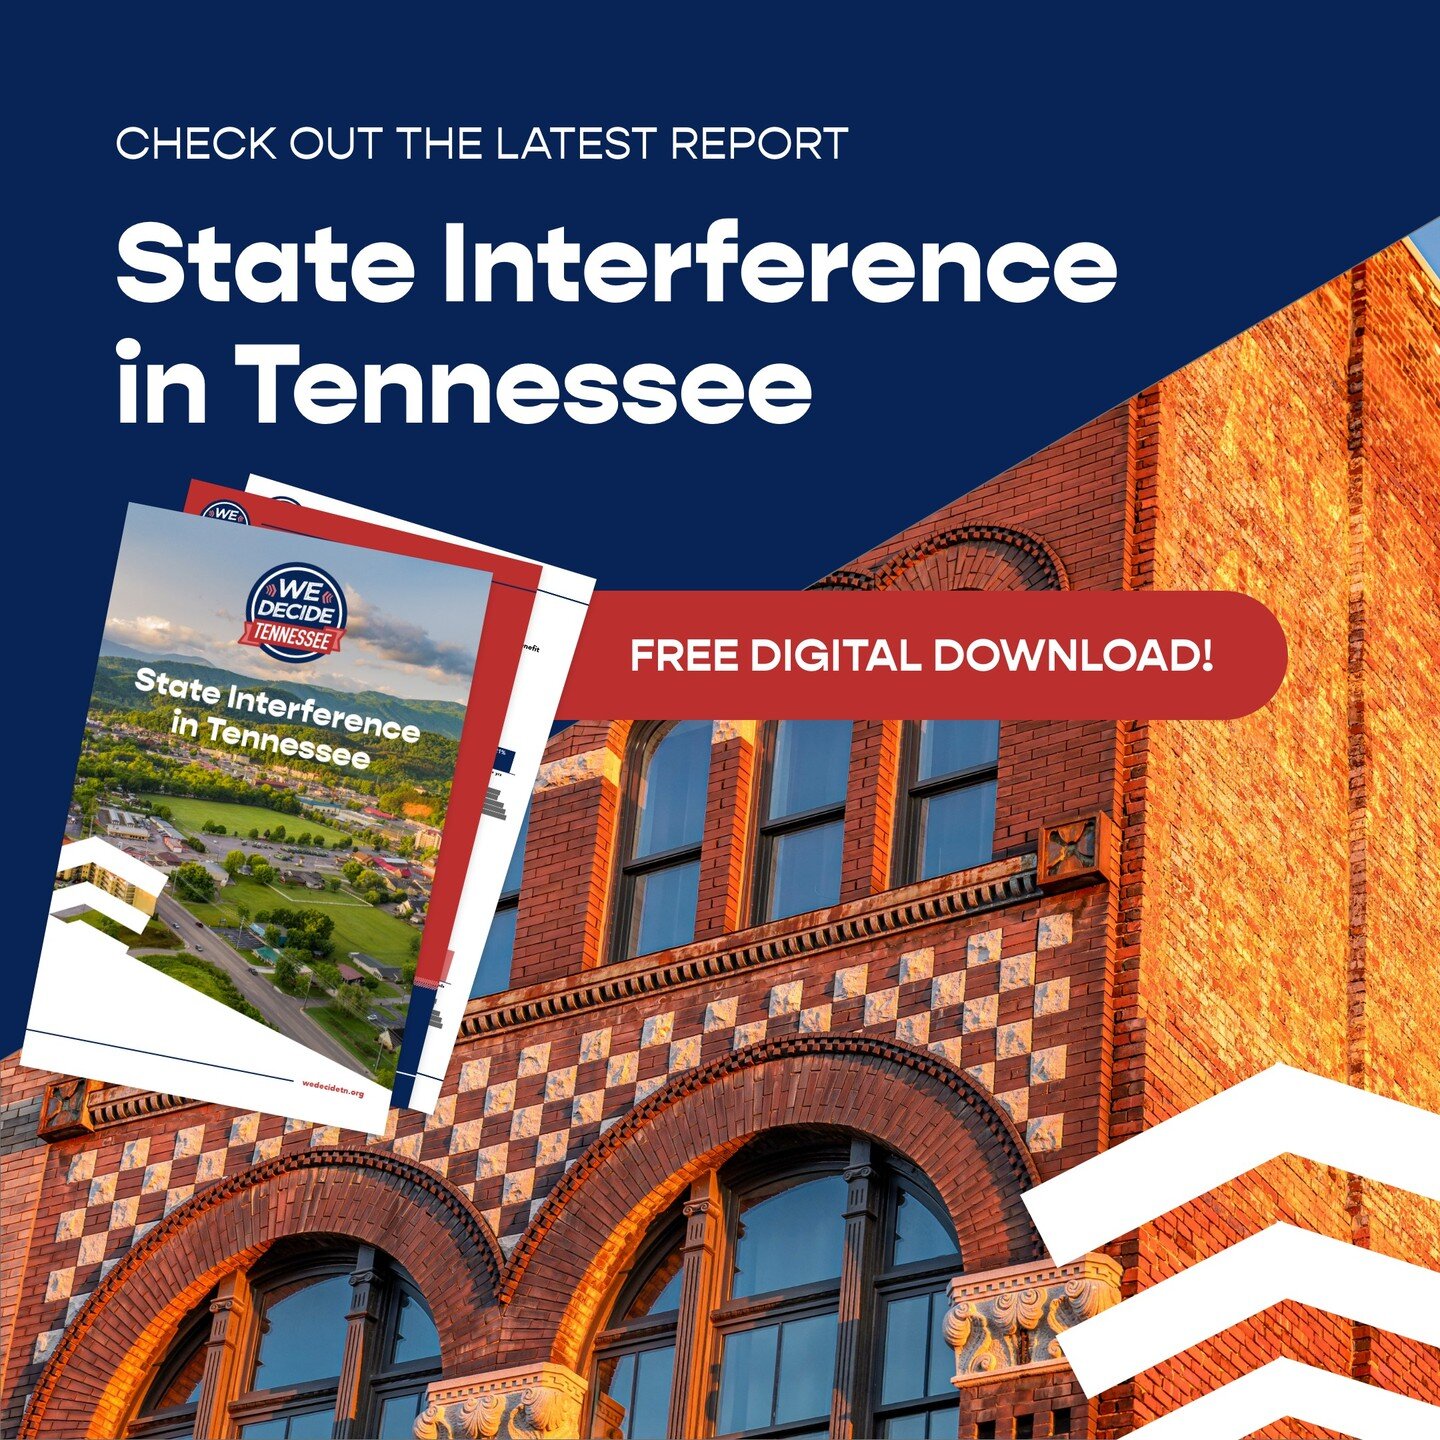 NEW REPORT: Big corporations are tying the hands of local lawmakers through state interference and it&rsquo;s happening at an alarming rate in #Tennessee. Our 2023 TN State Interference Report explores how restrictions on local decision-making impact